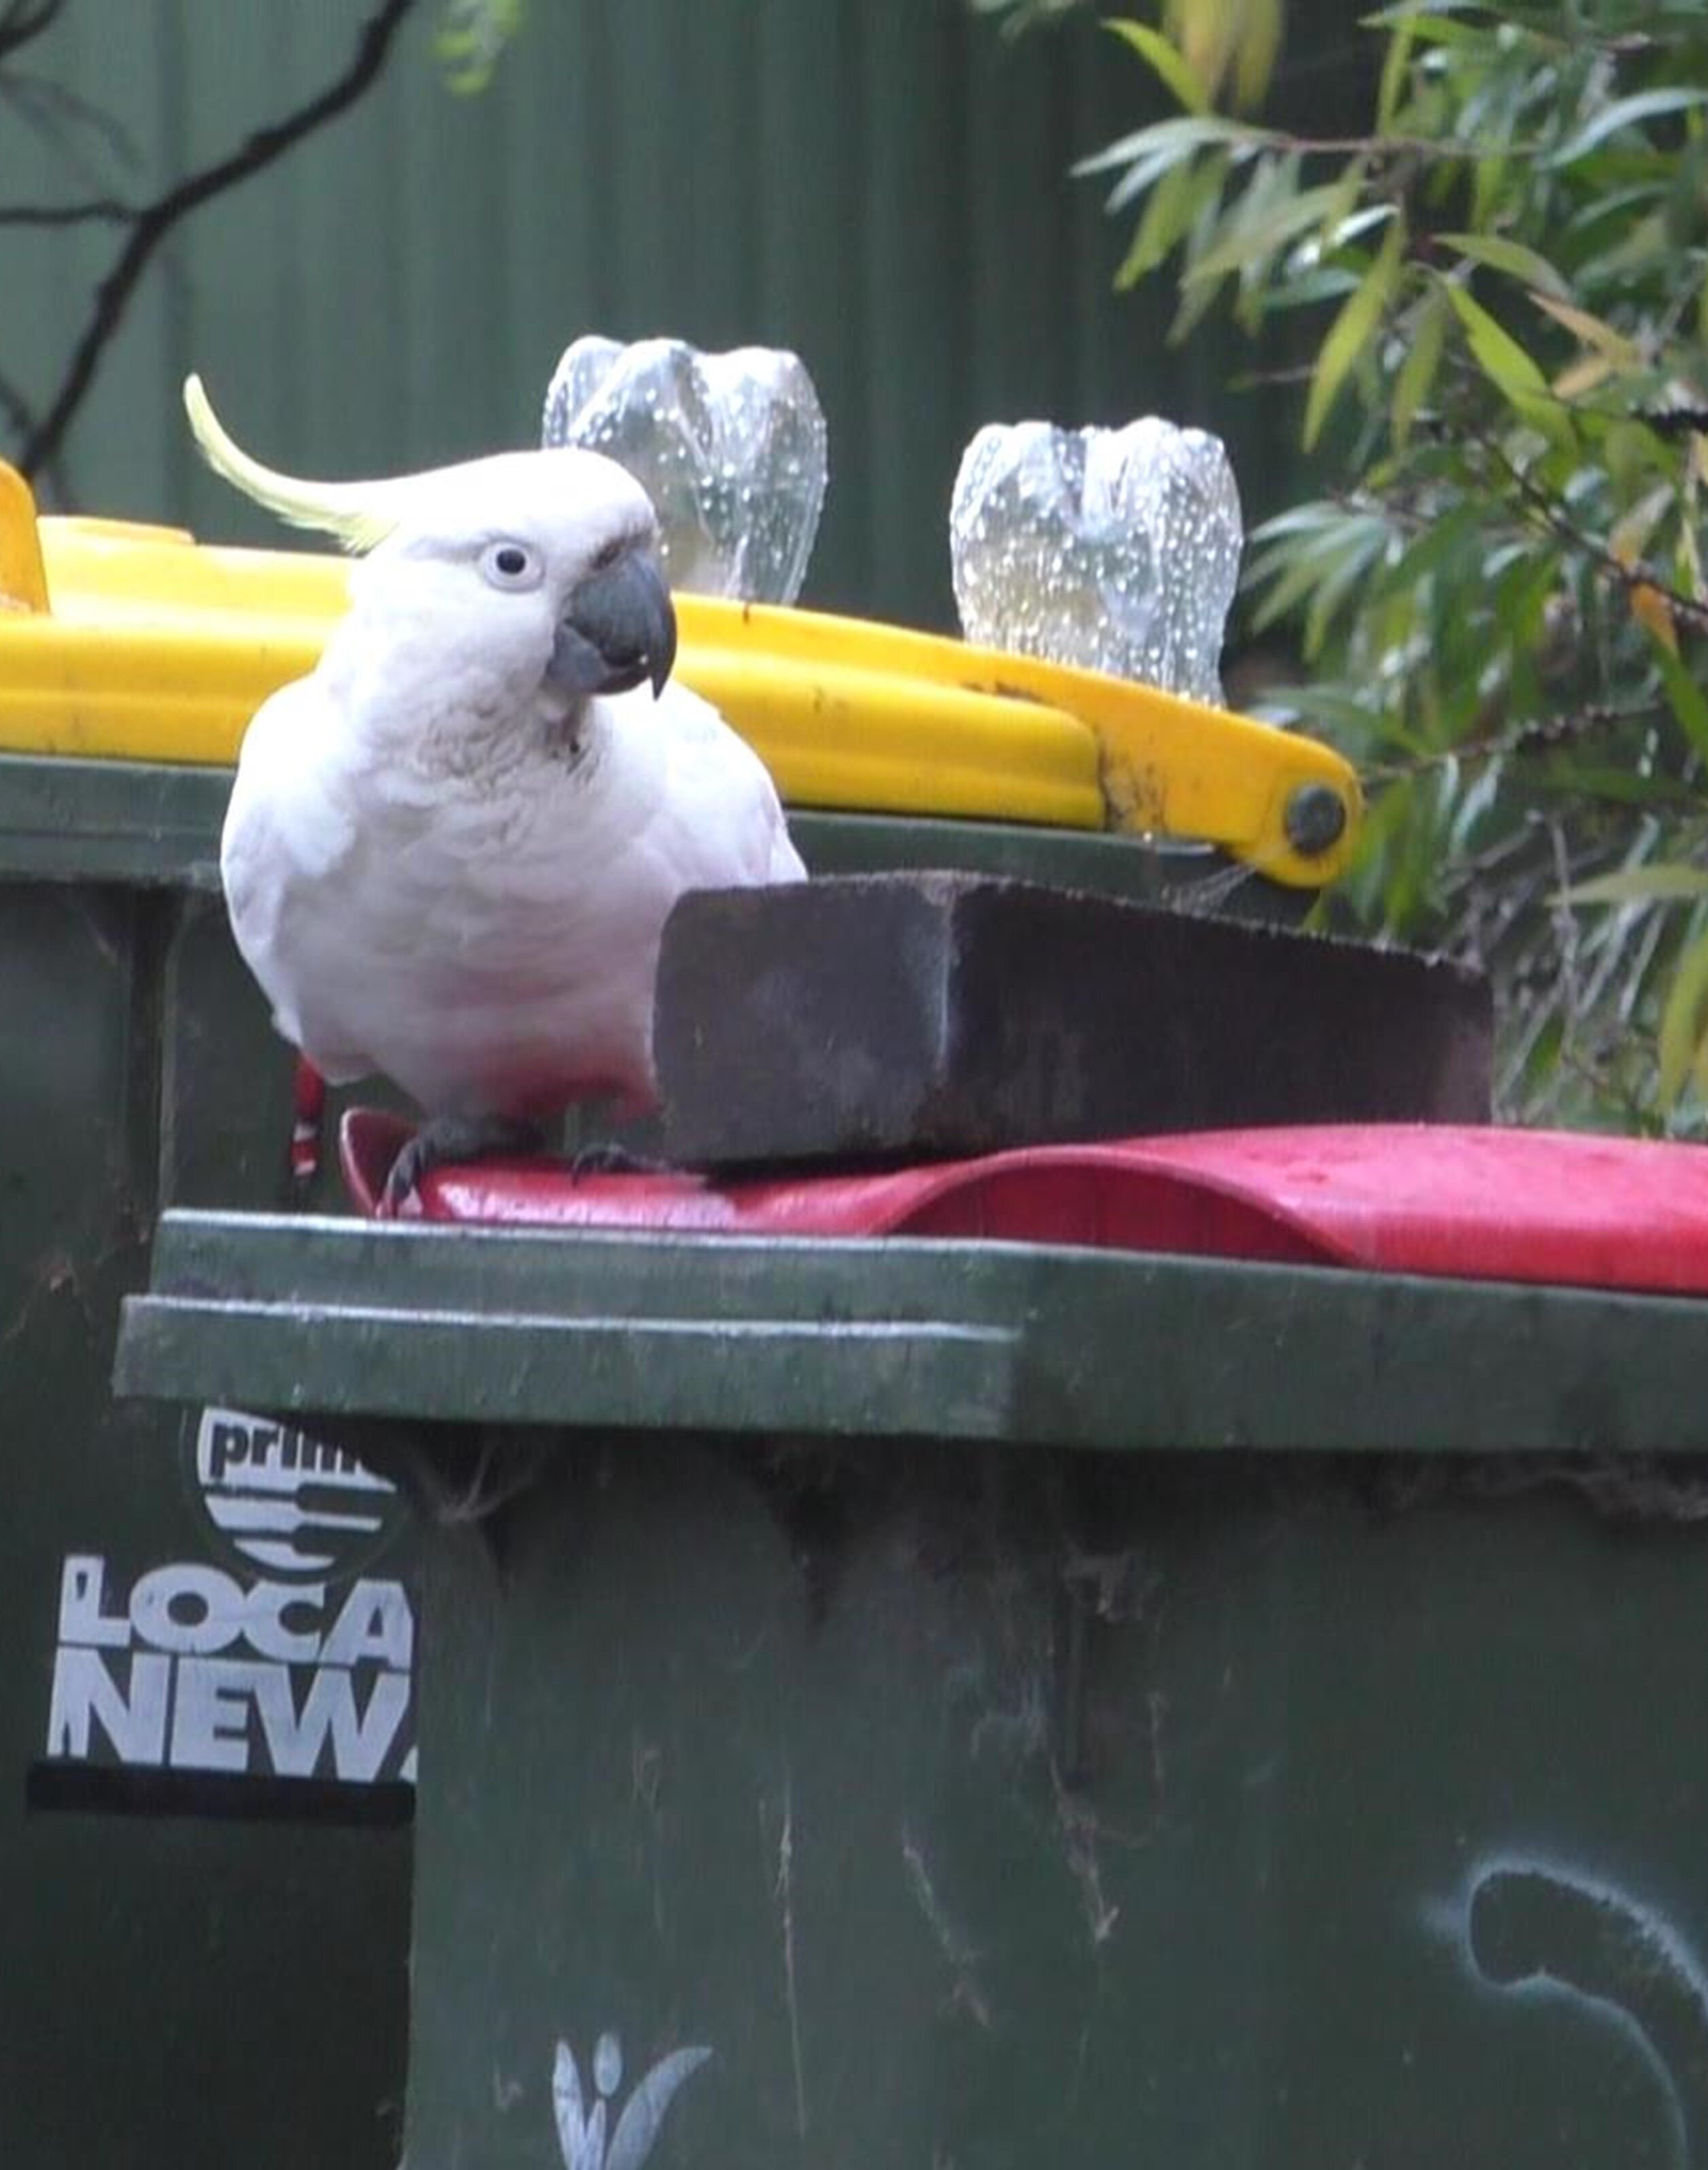 #Bin-opening cockatoos enter ‘arms race’ with humans